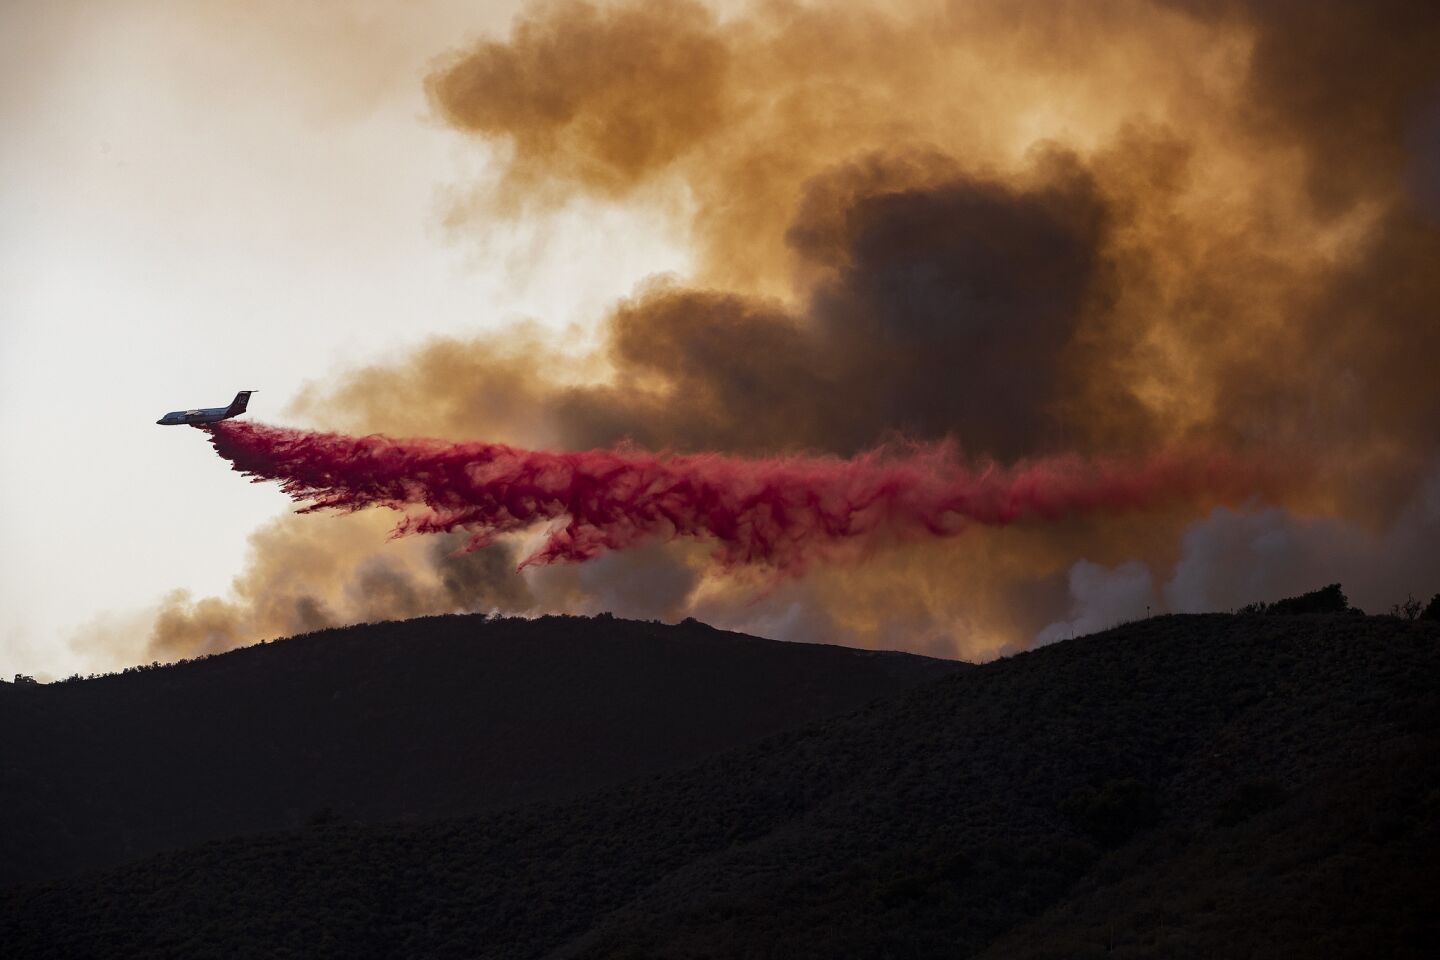 An air tanker drops fire retardant on a flare-up of the Holy fire on a mountain ridge above Lake Elsinore, Calif. Saturday.